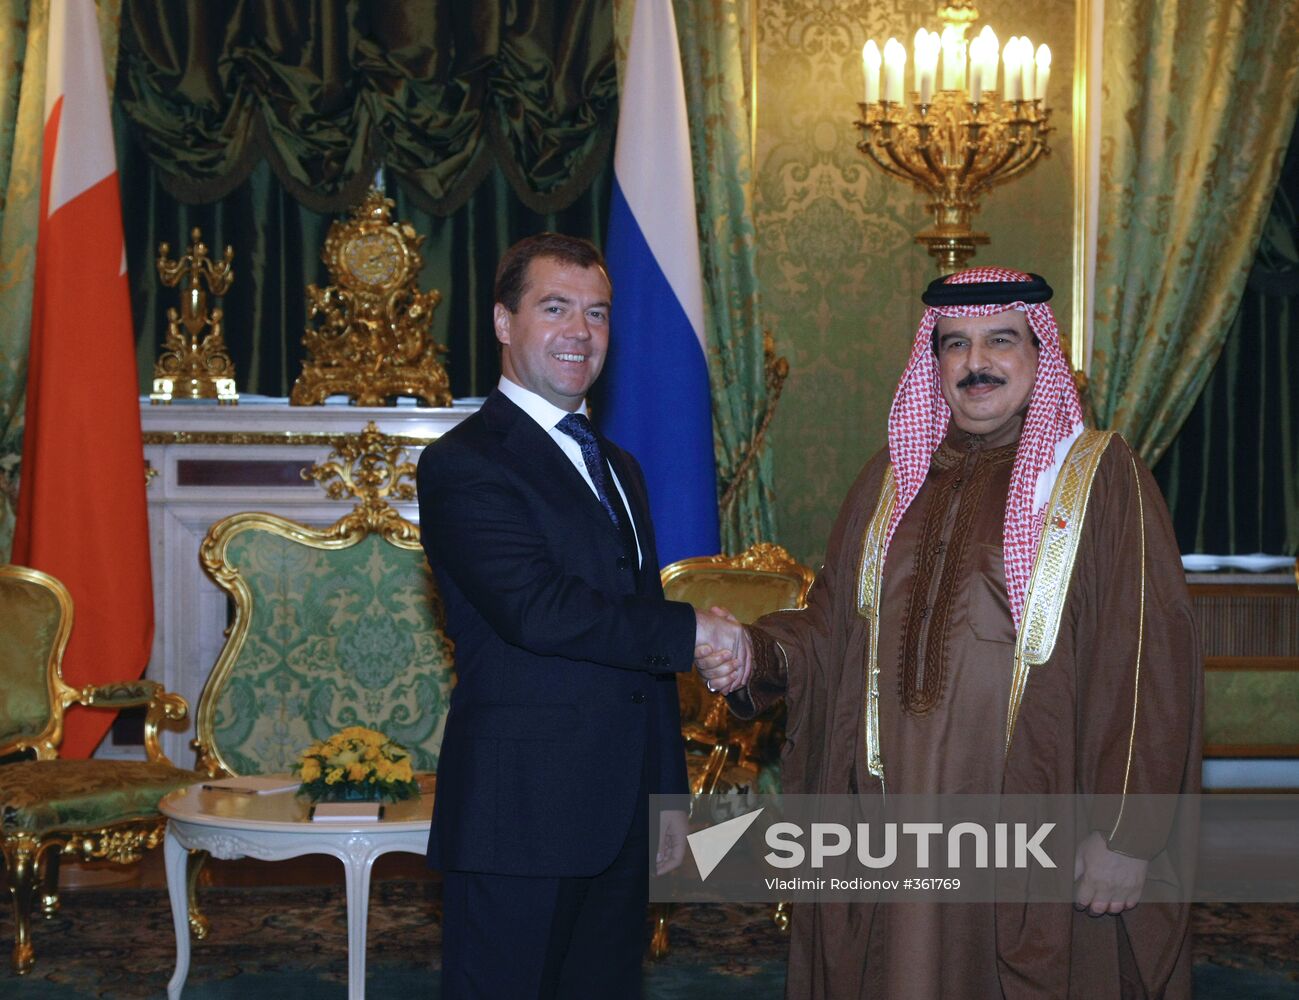 Meeting of Russian President and King of Bahrein